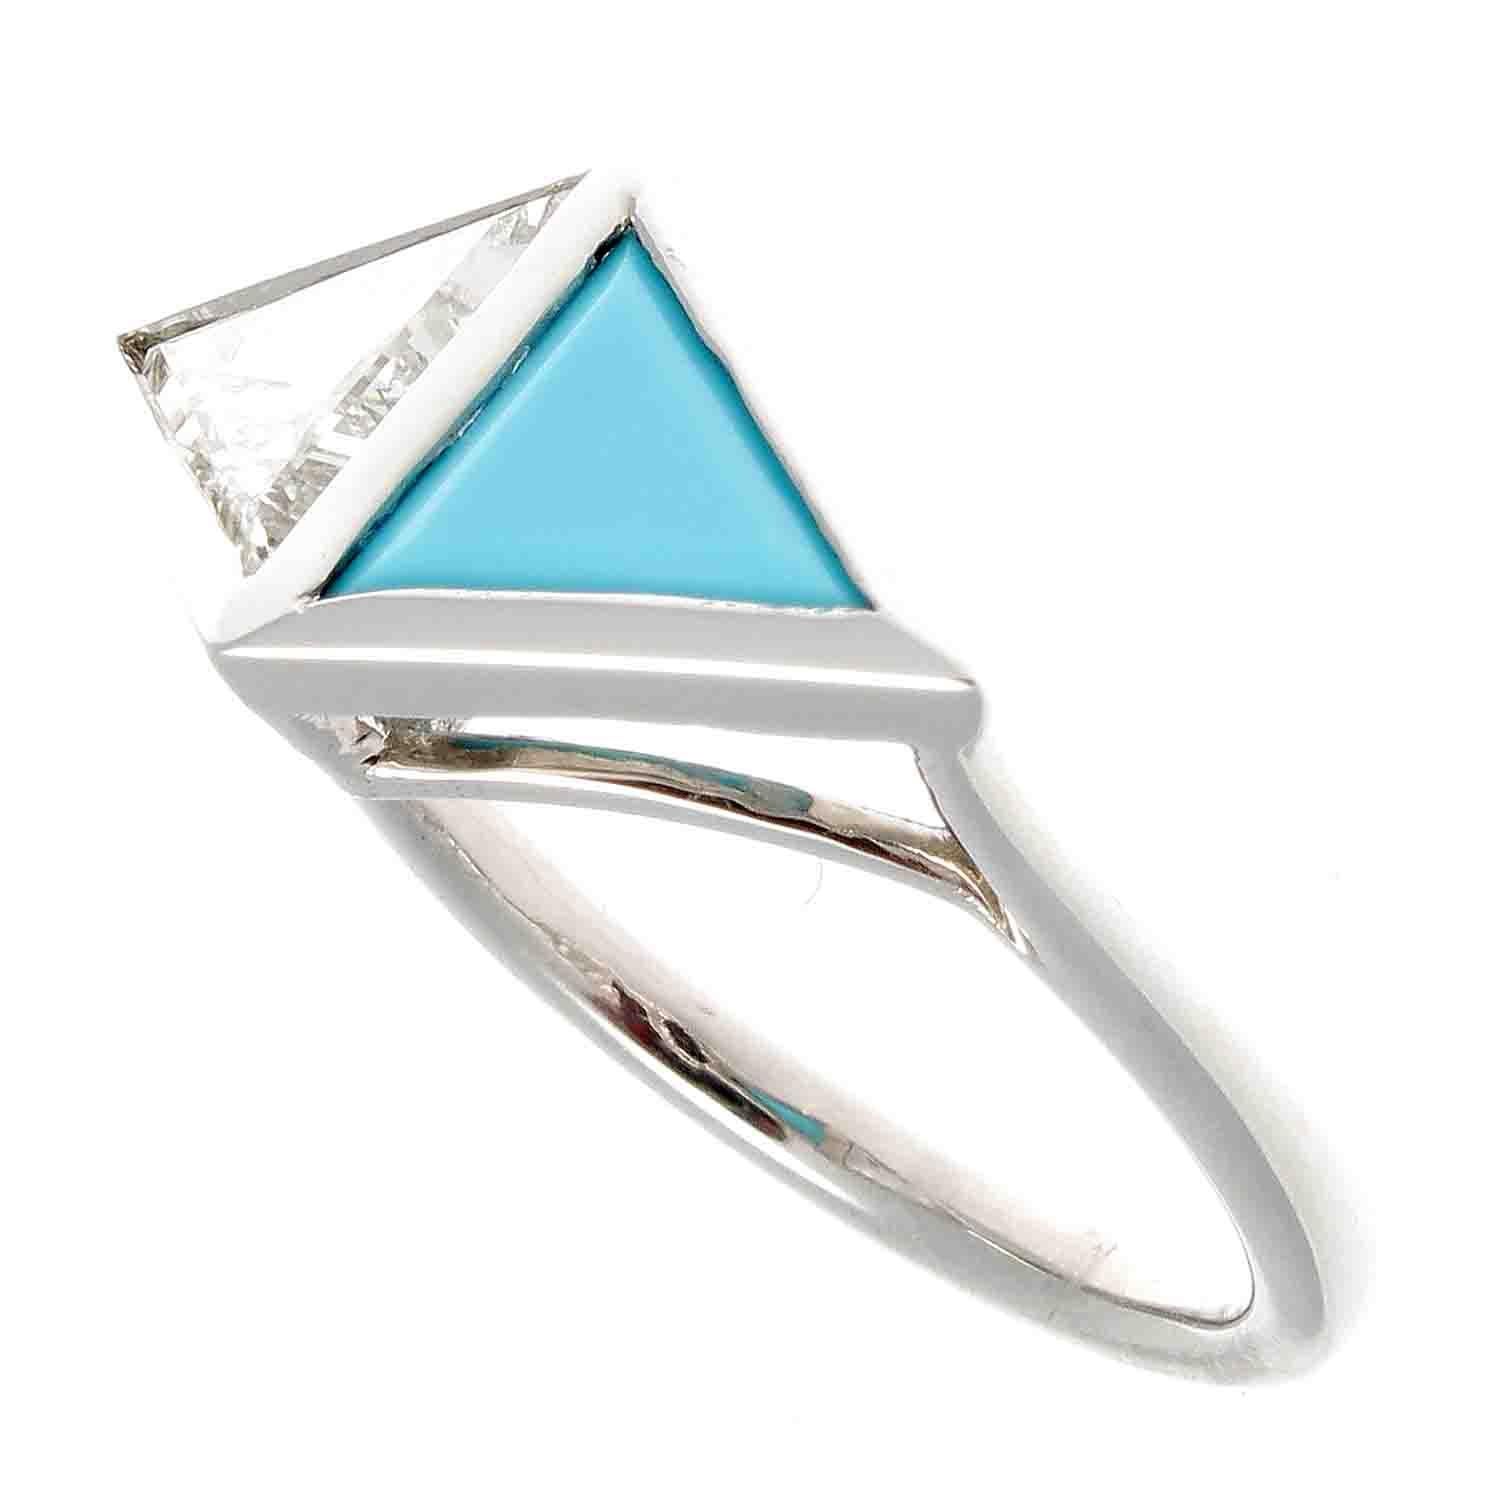 Creativity exposed through a symbiotic relationship of color and technical geometric design. Featuring a 0.97 carat triangular cut diamond that is K color, SI2 clarity that has been perfectly paired with an electrifying turquoise stone. Hand crafted